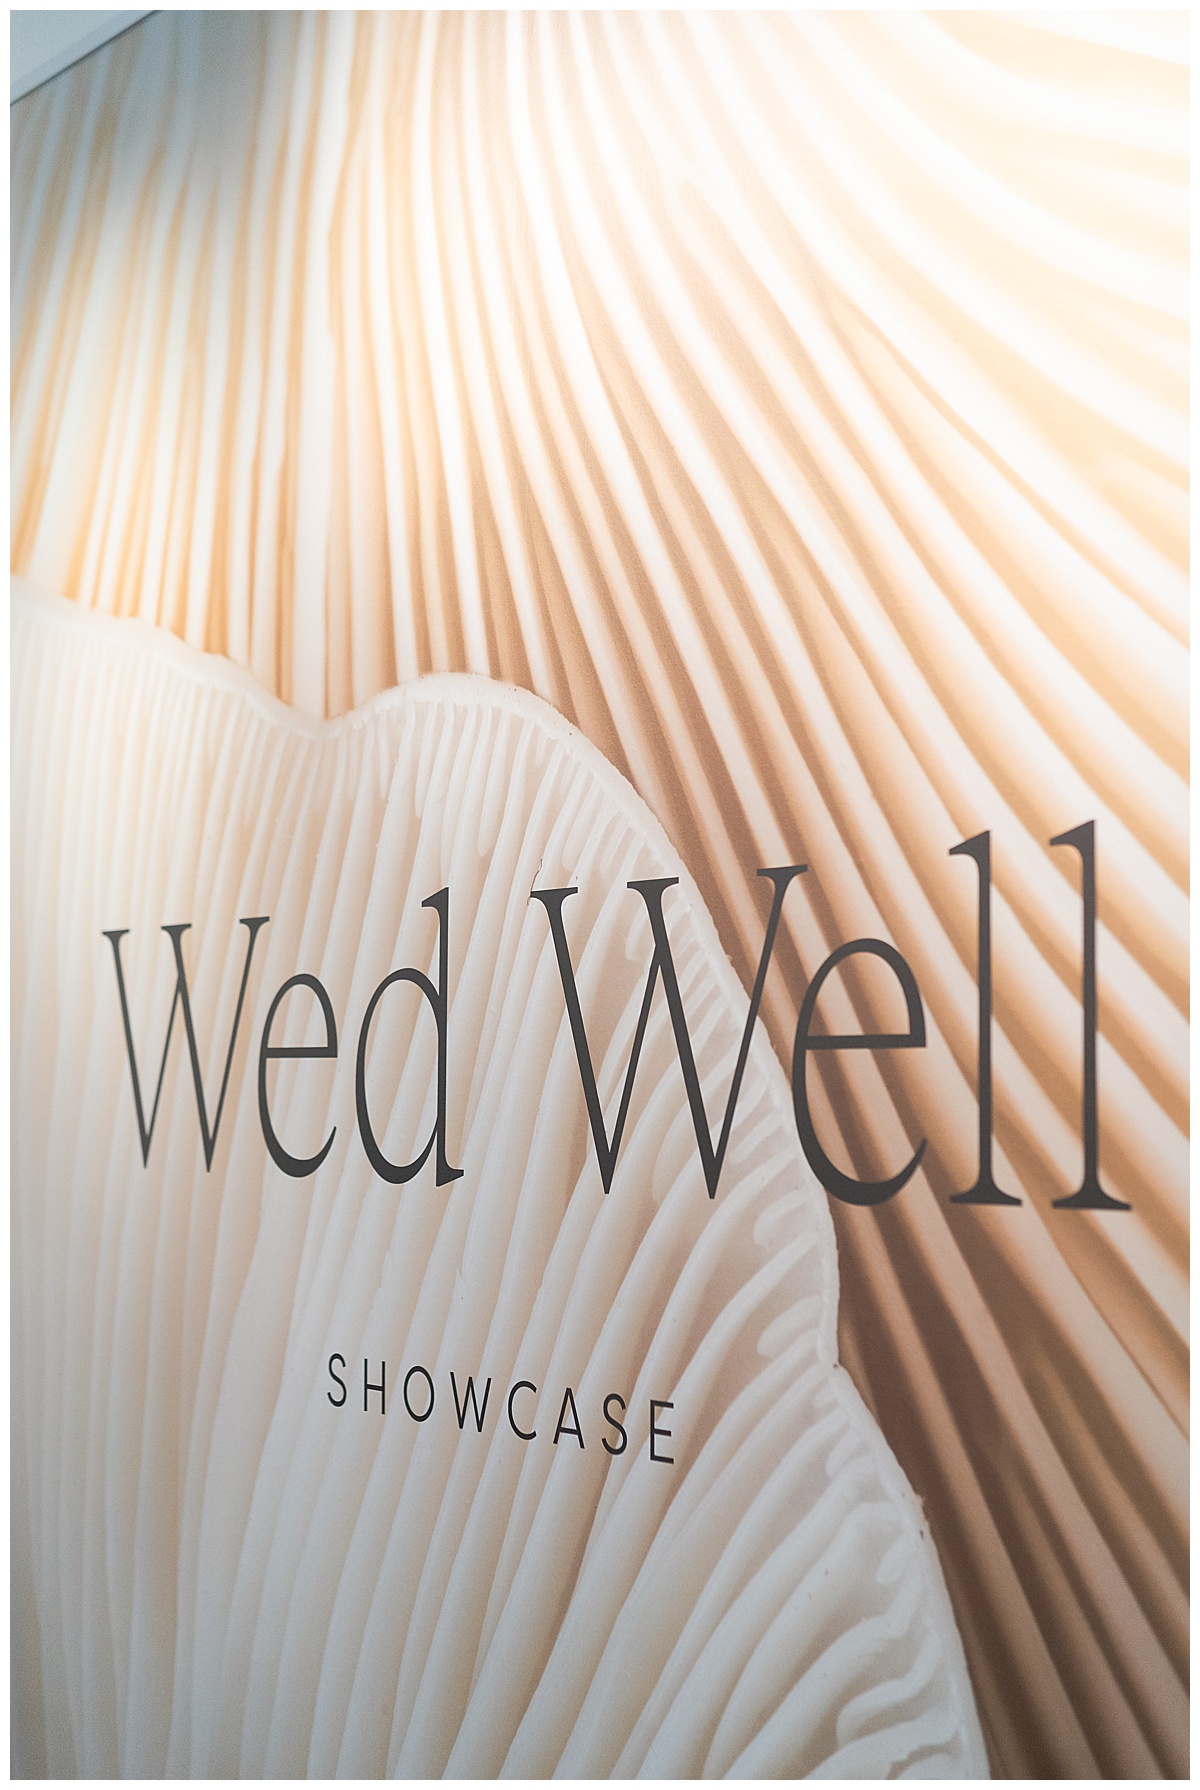 Stunning custom sign for the Wed Well Showcase